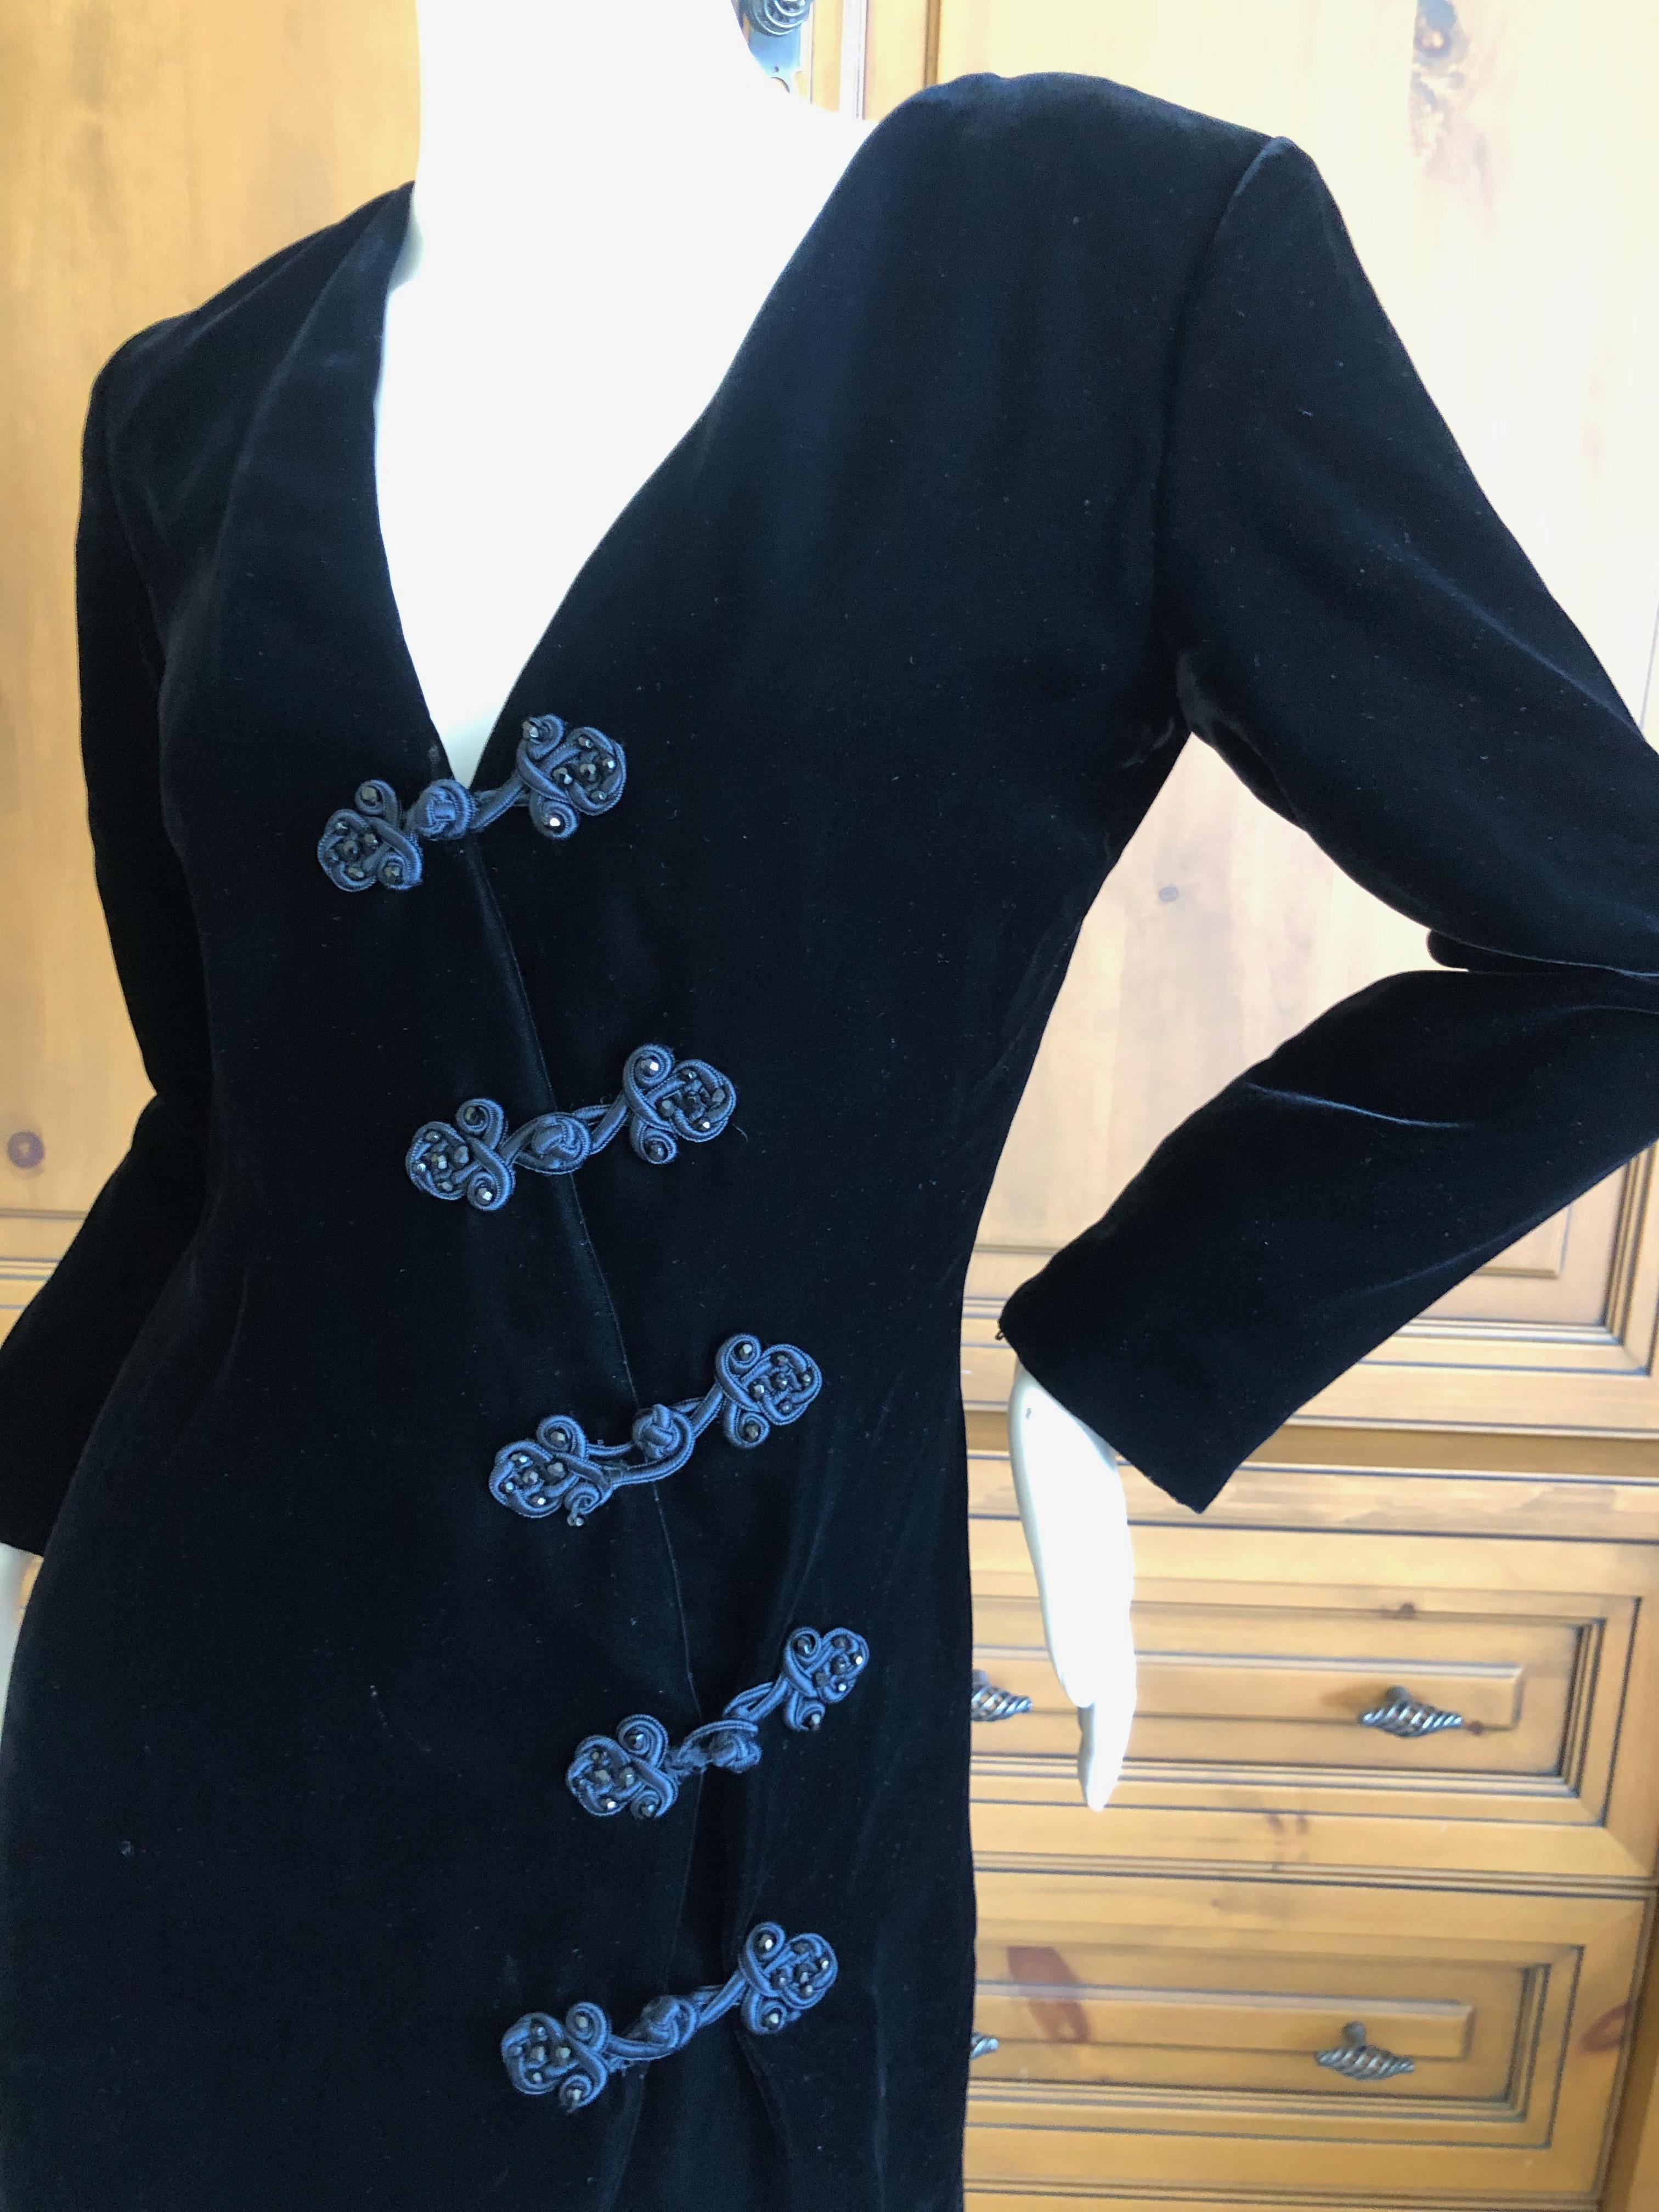 Yves Saint Laurent 70's Rive Gauche Velvet Mini Dress with Diagonal Frog Closure.
This is so pretty, inspired by the Cheongsam , with turquoise silk lining and beaded frog closures.
 Size 44
Bust 39